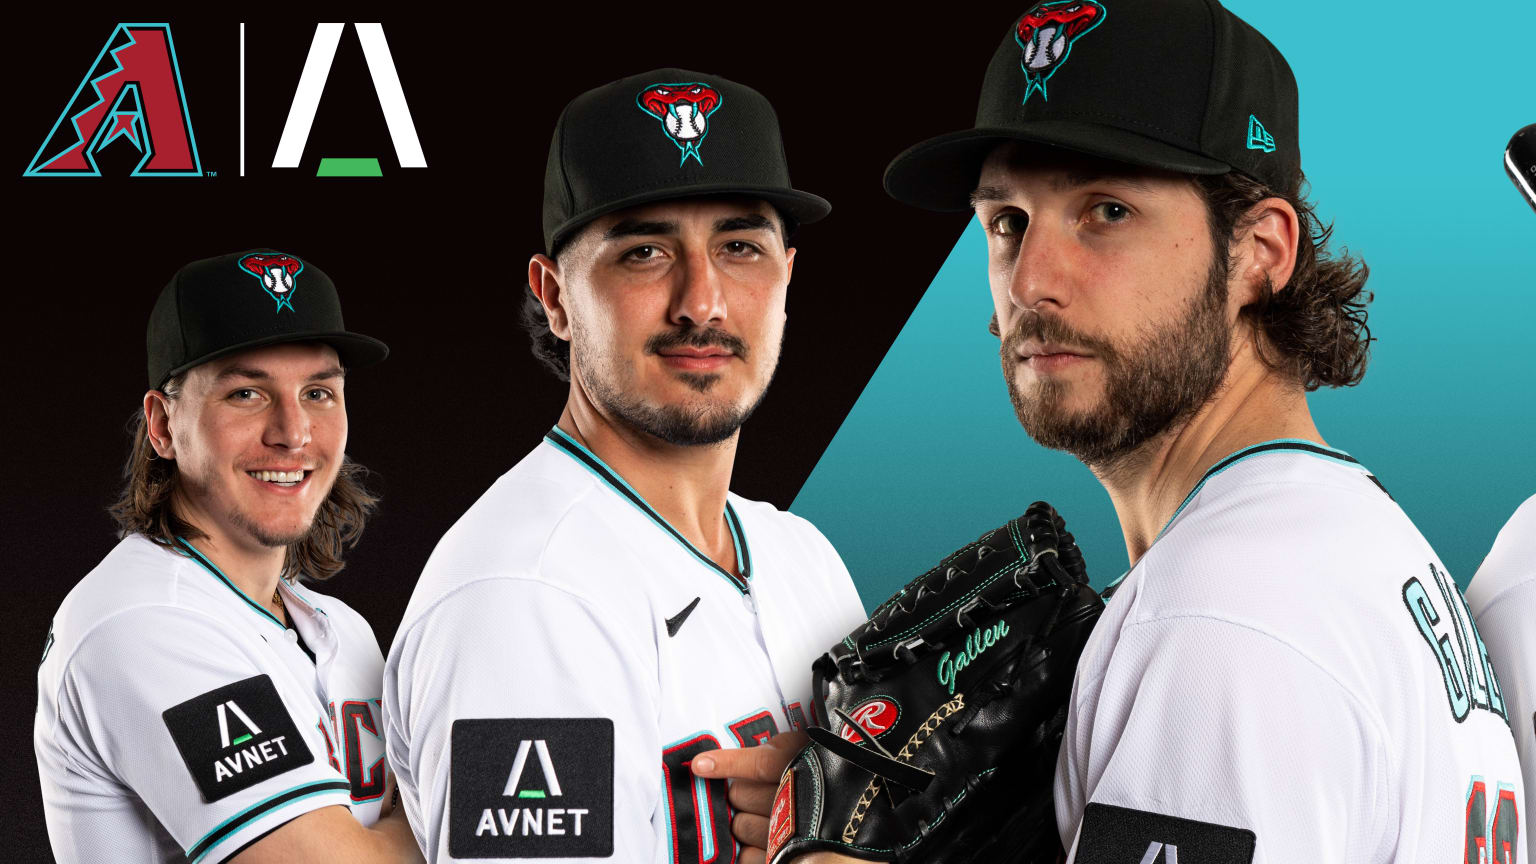 Arizona D-backs add sponsored patches to jerseys with new partnership